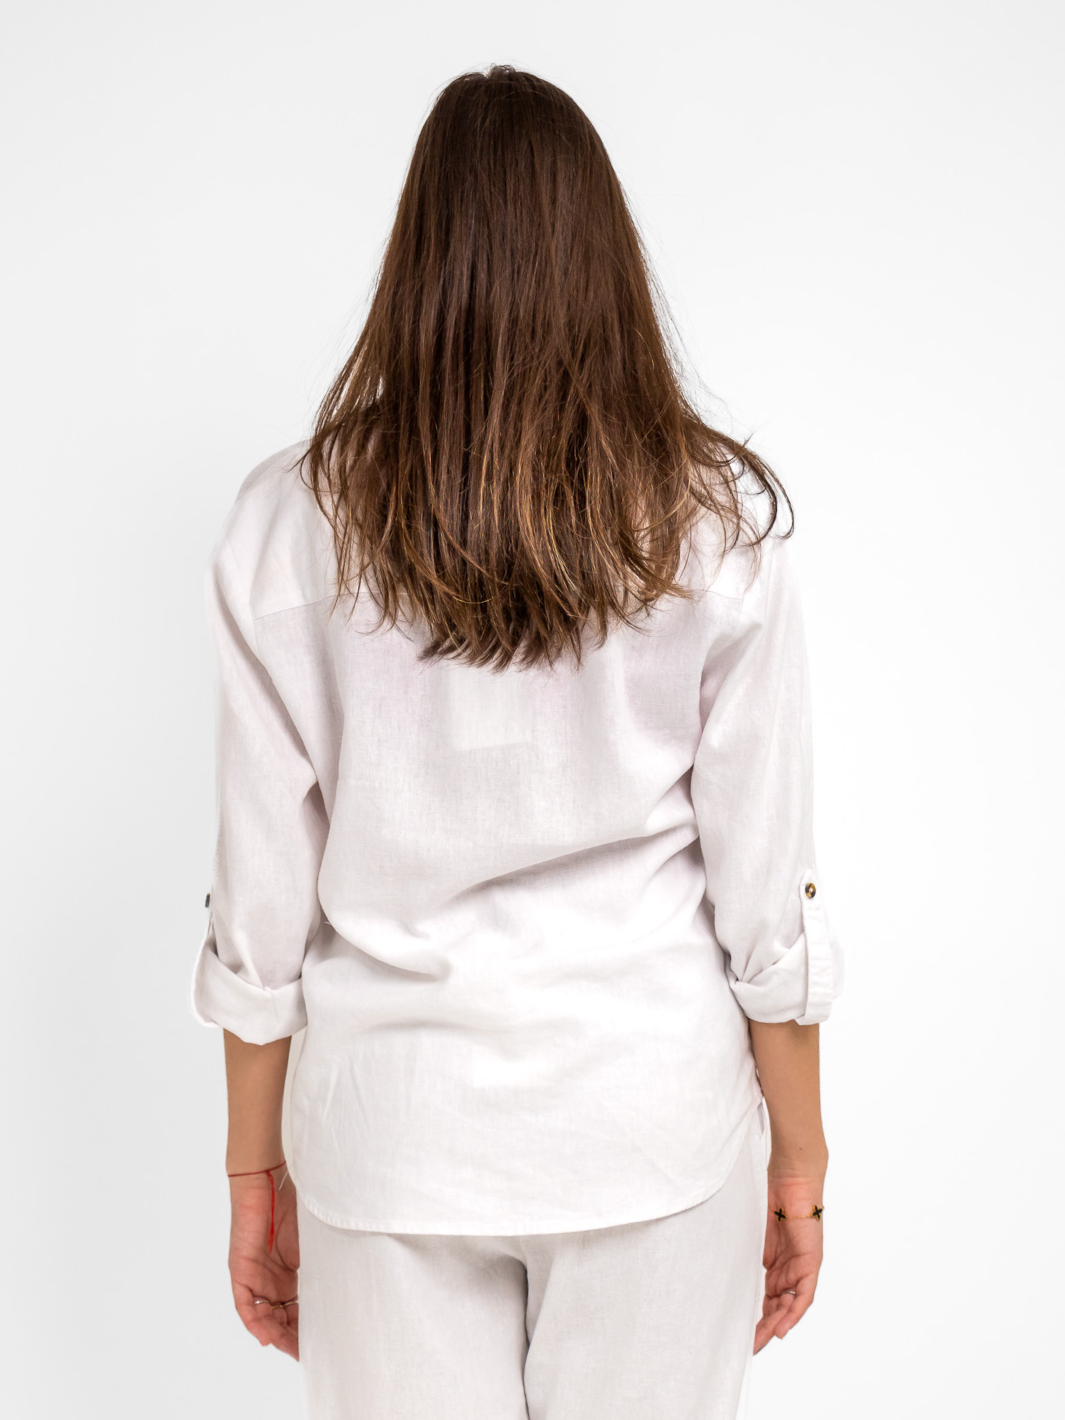 Freequent Linen Shirt In White-Nicola Ross